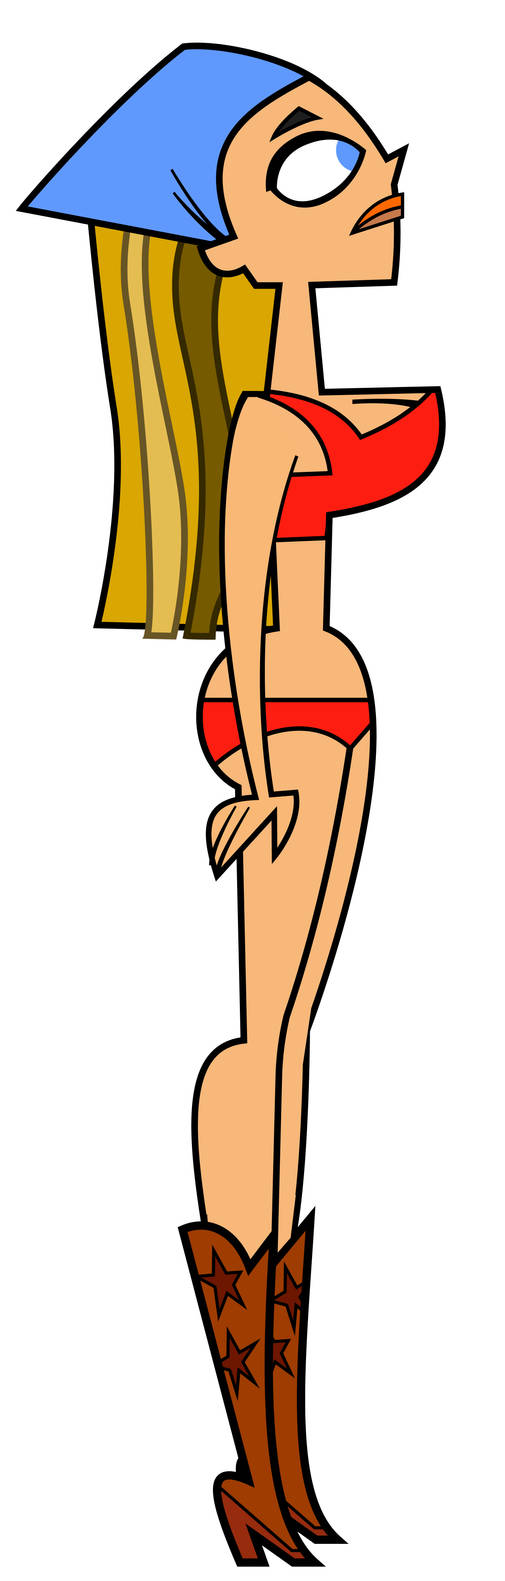 I wish lindsay total drama was real :/ she would've loved Barbie